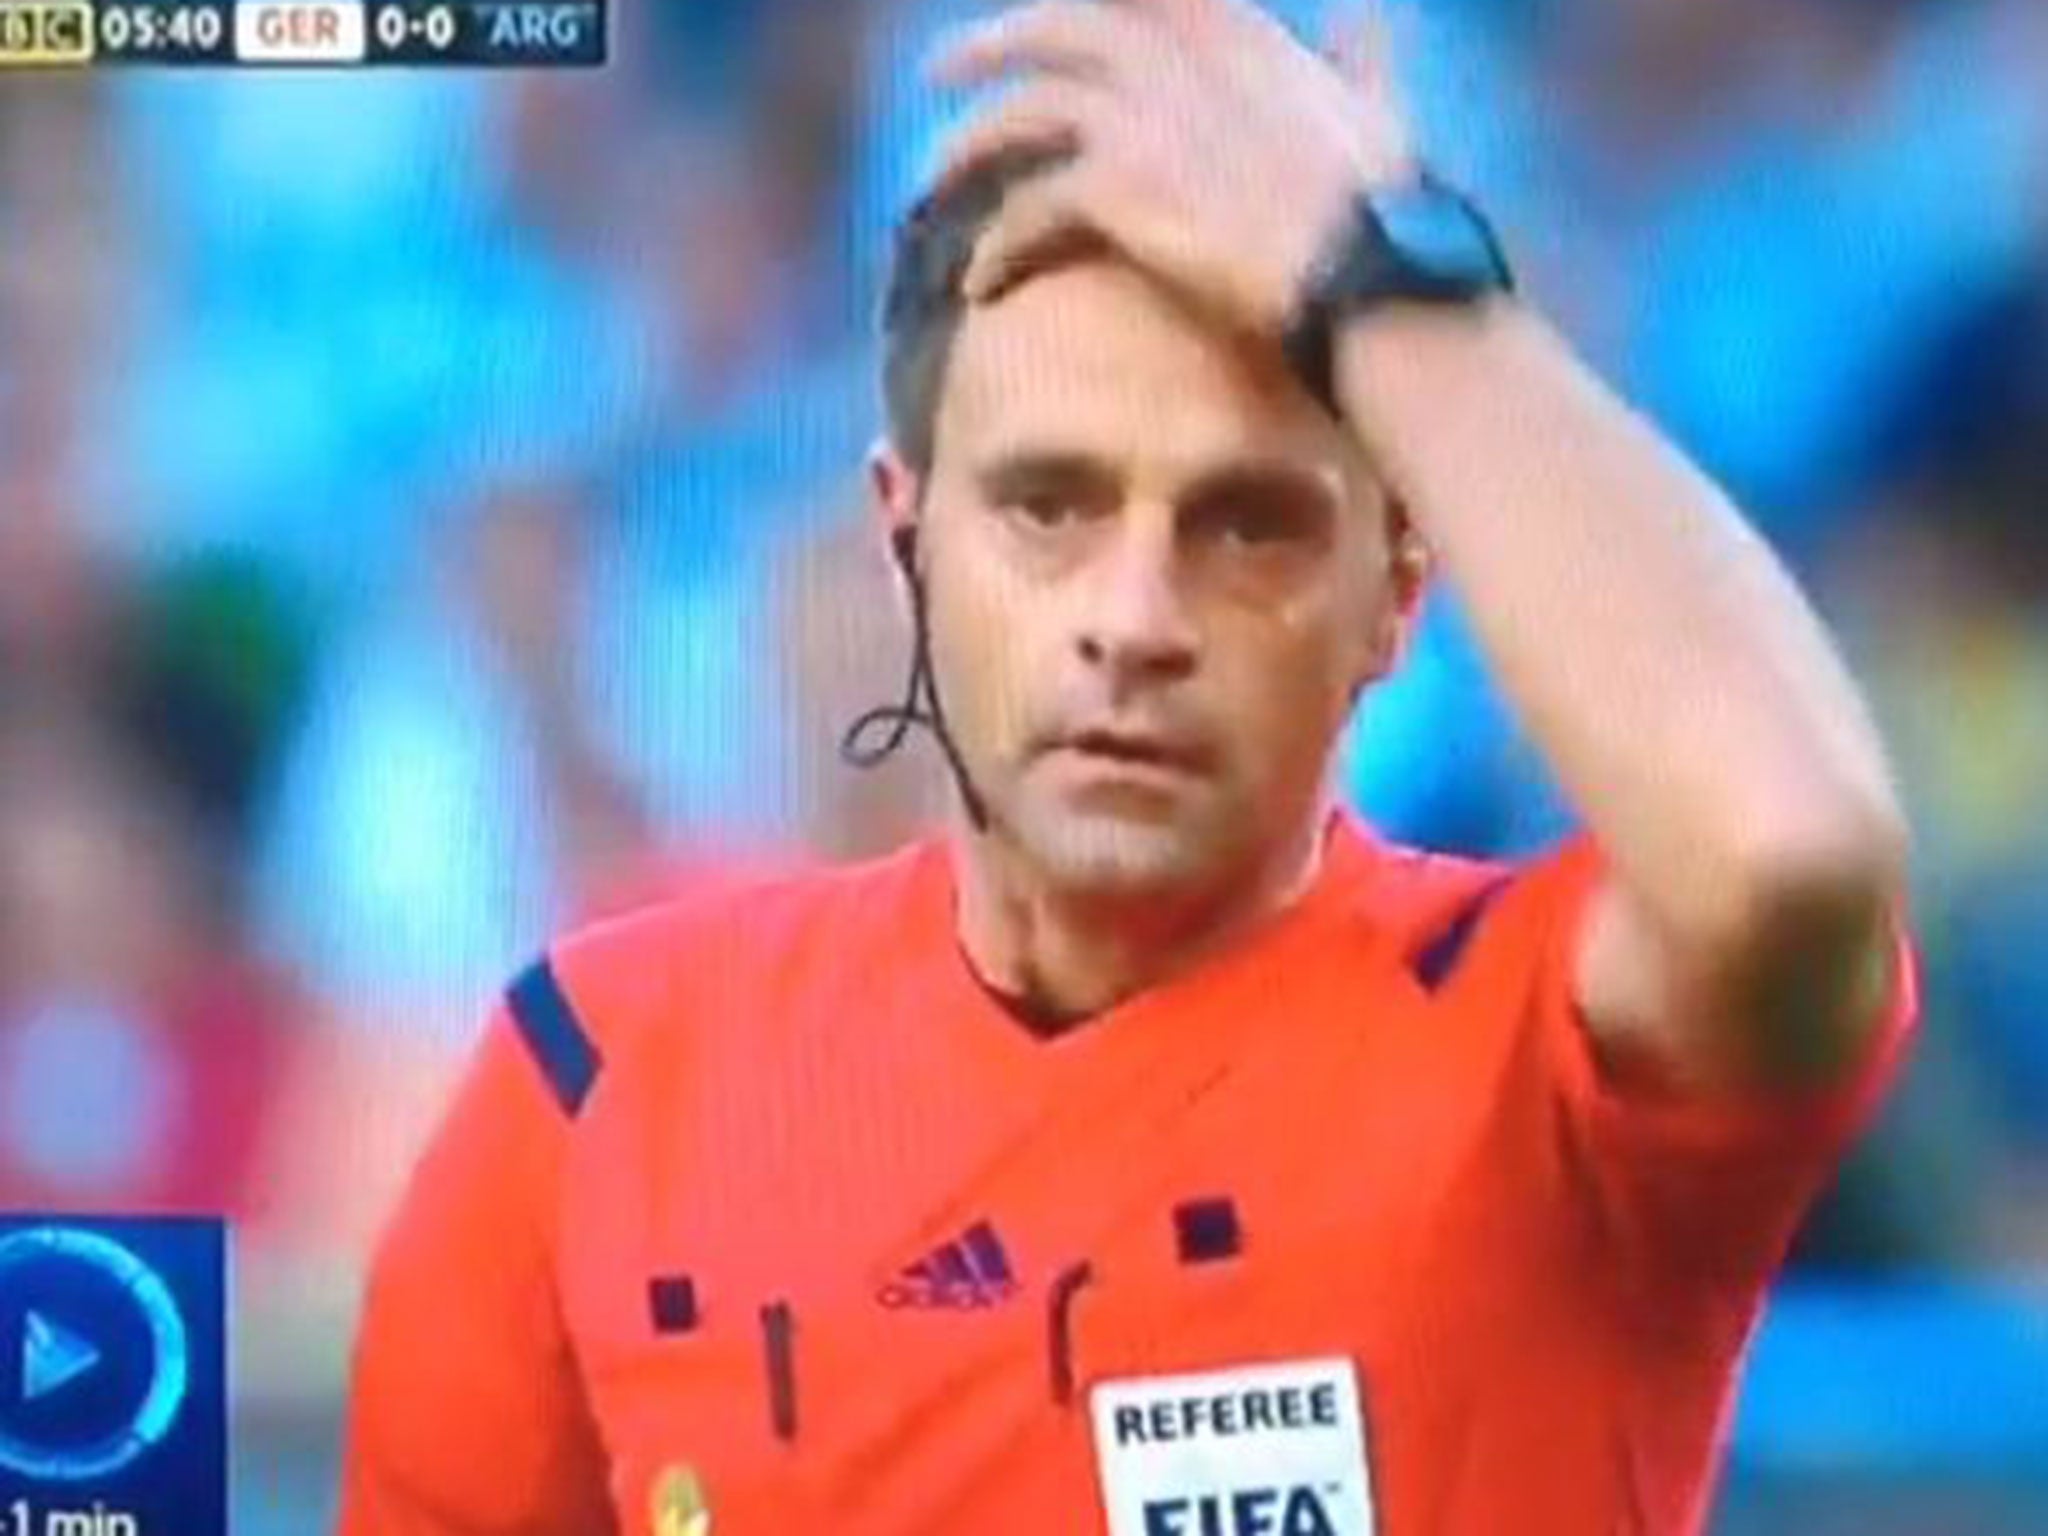 World Cup final referee Nicola Rizzoli sorted out his hair after spotting himself on the big screen